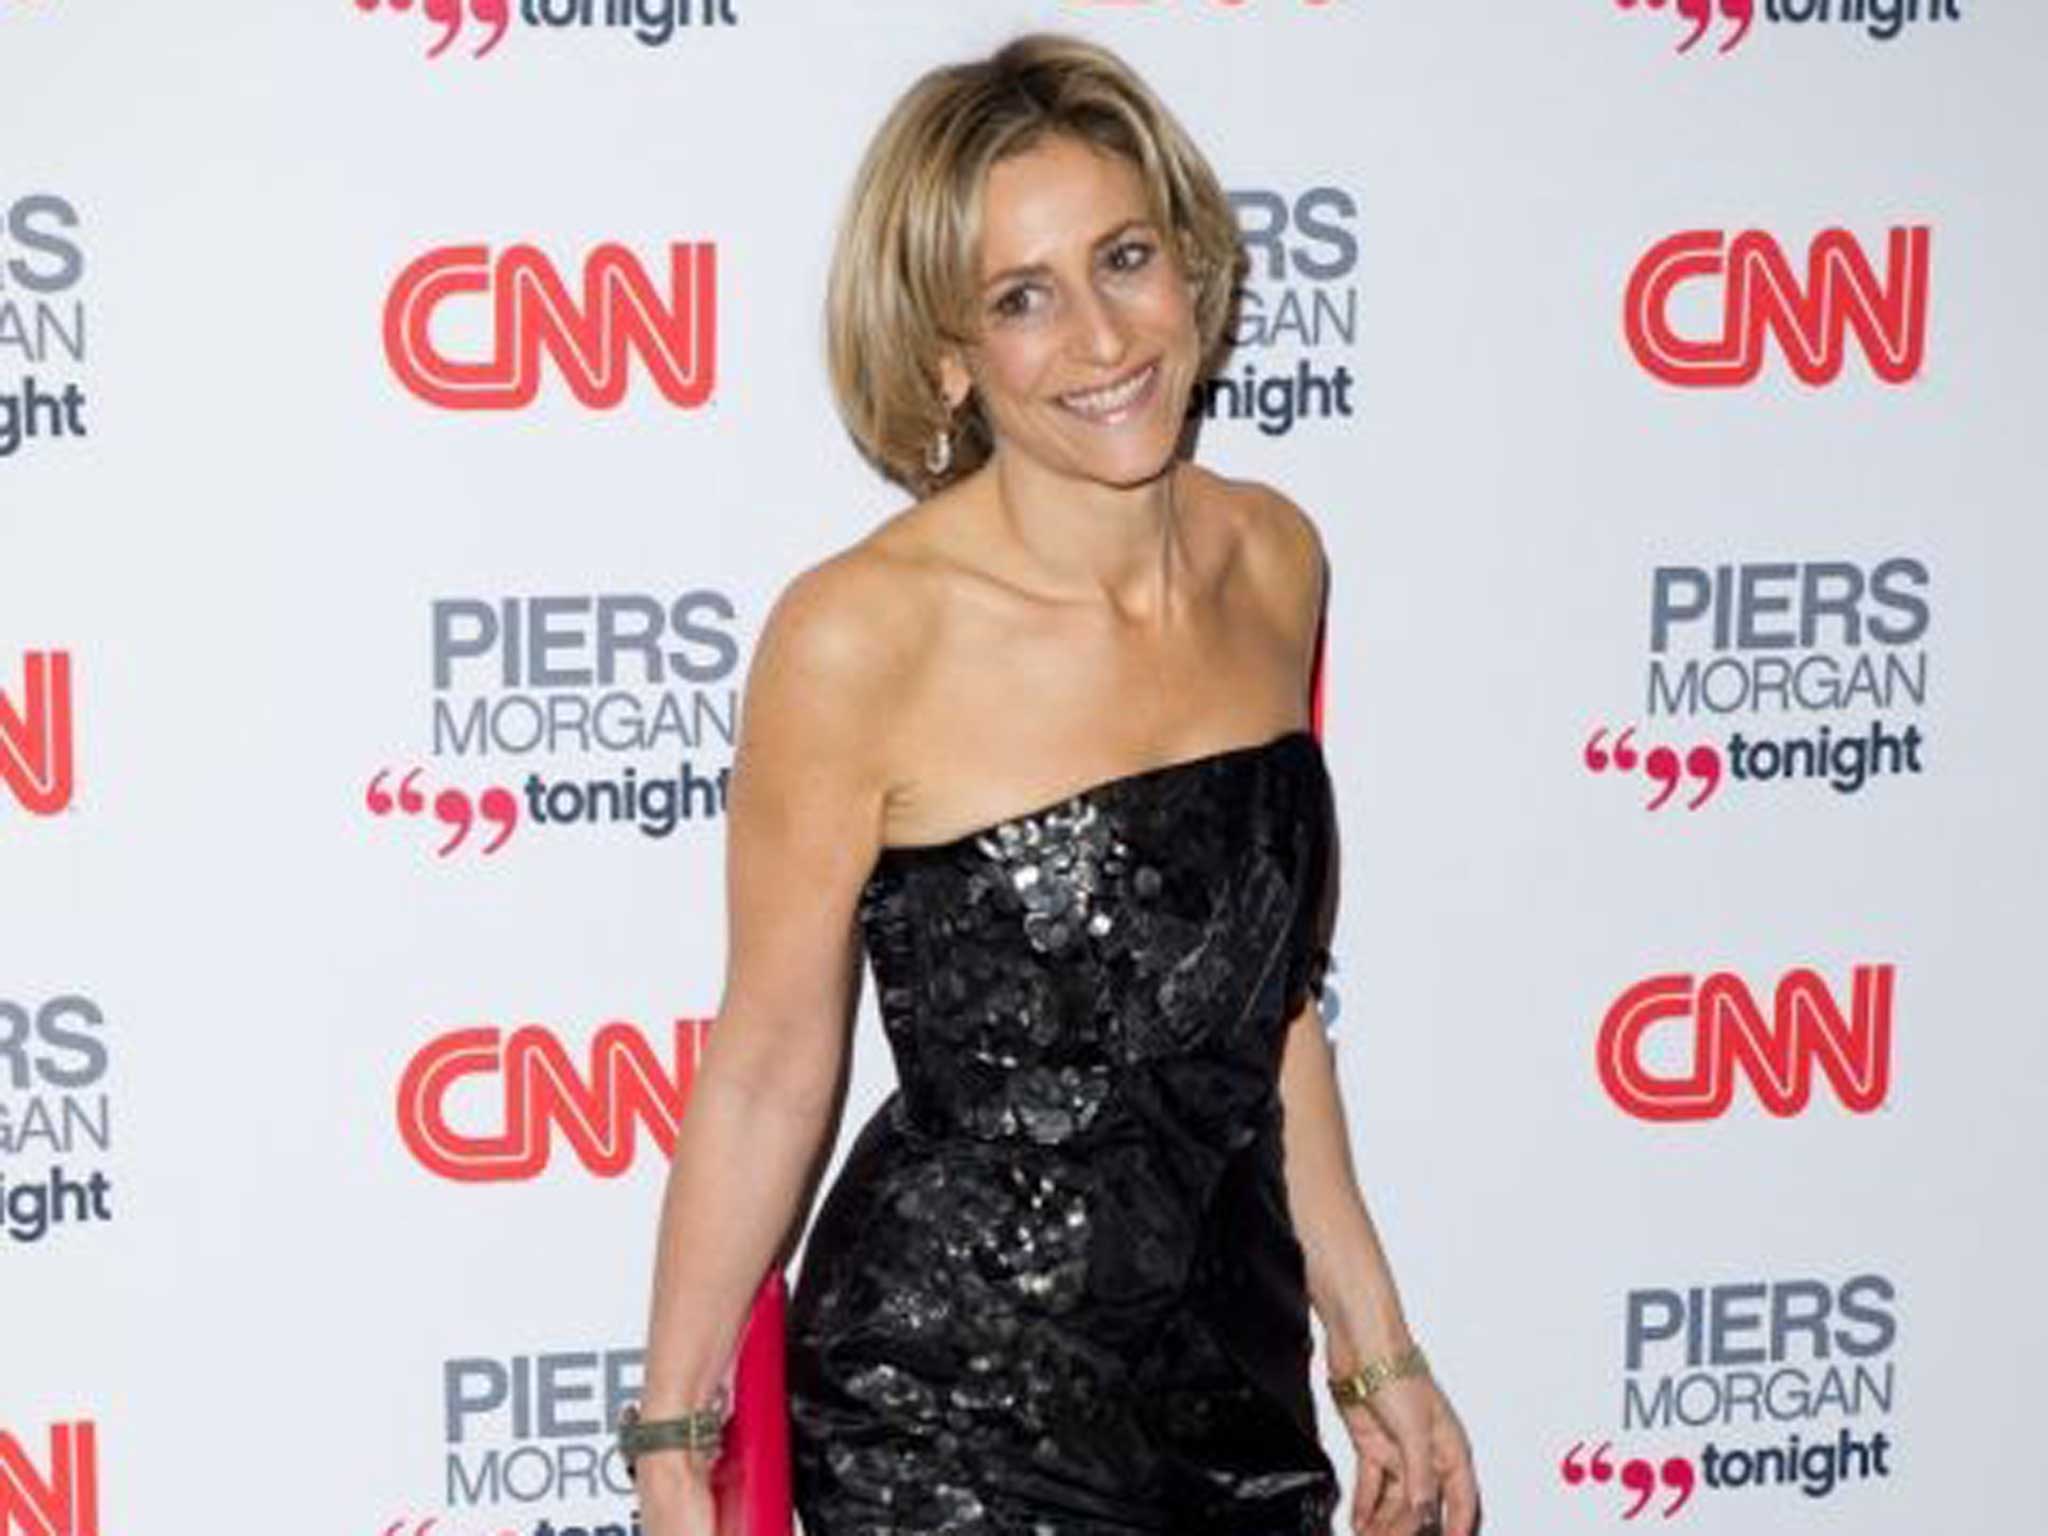 Emily Maitlis has started a Twitter storm over her interview with Spike Jonze